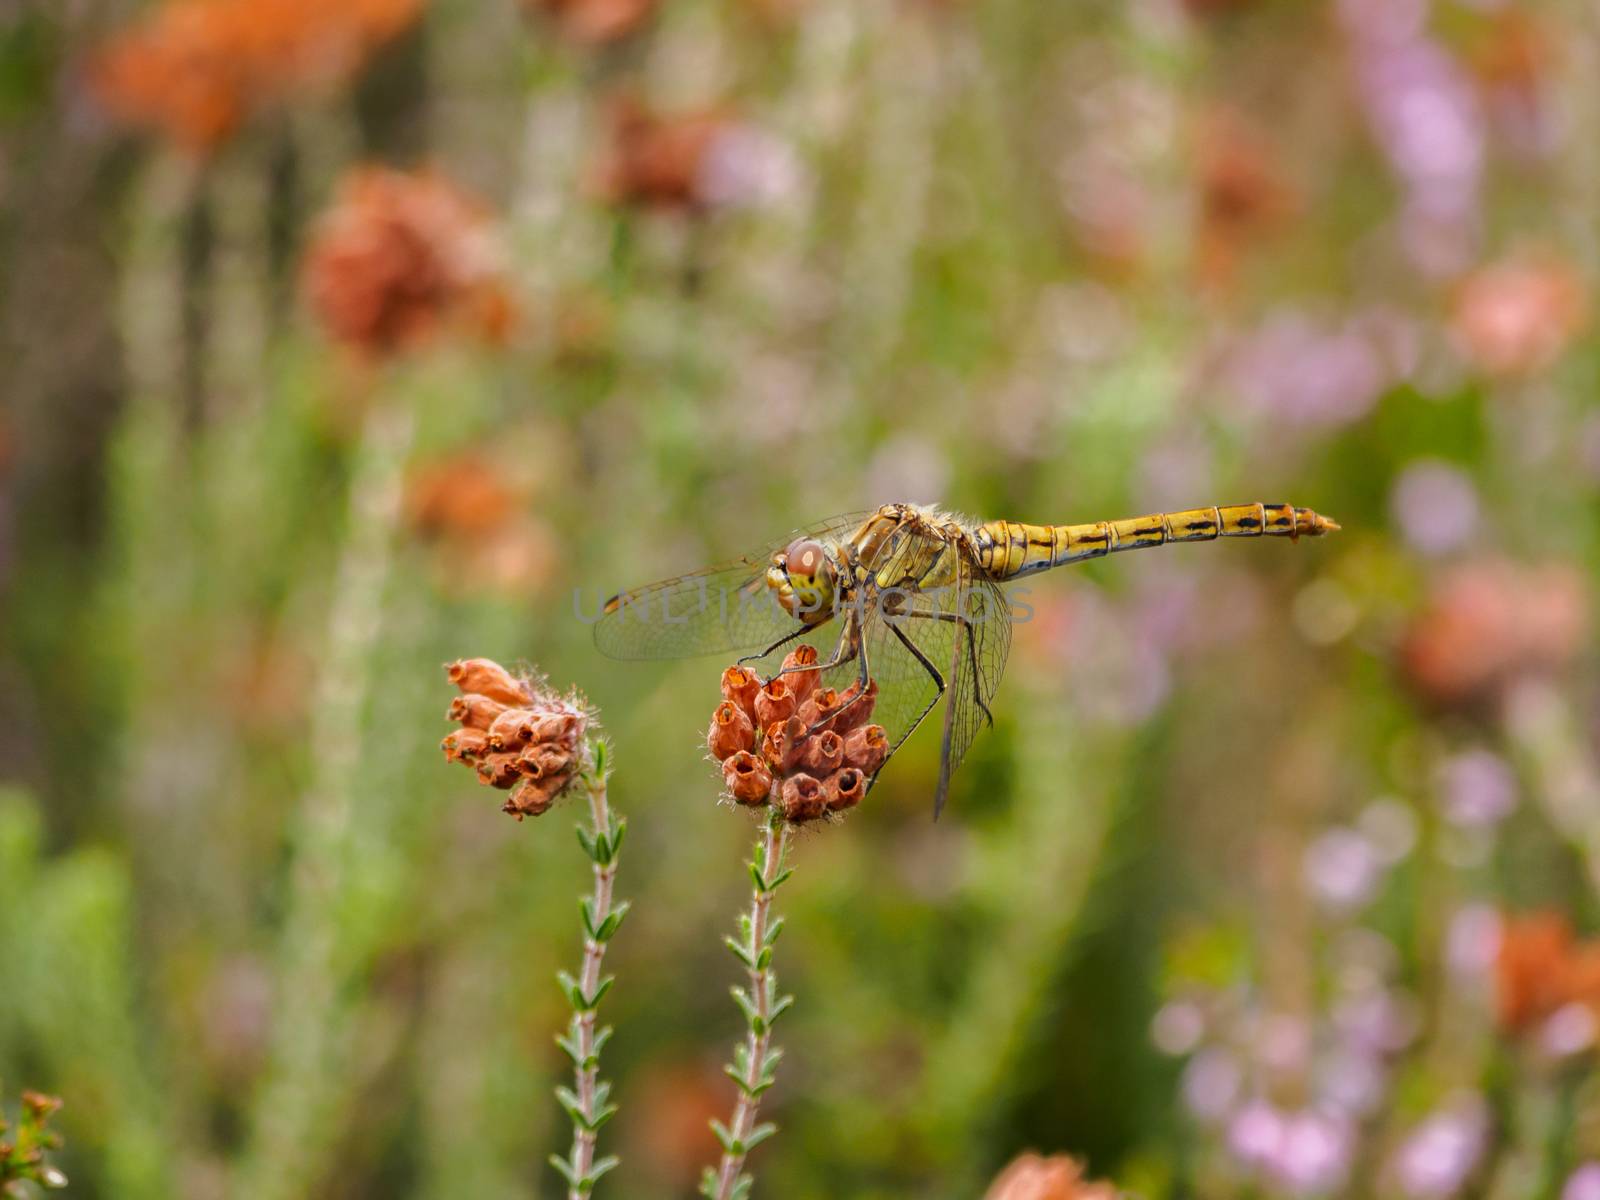 A solitary yellow mustached darter resting on some wild red flowers